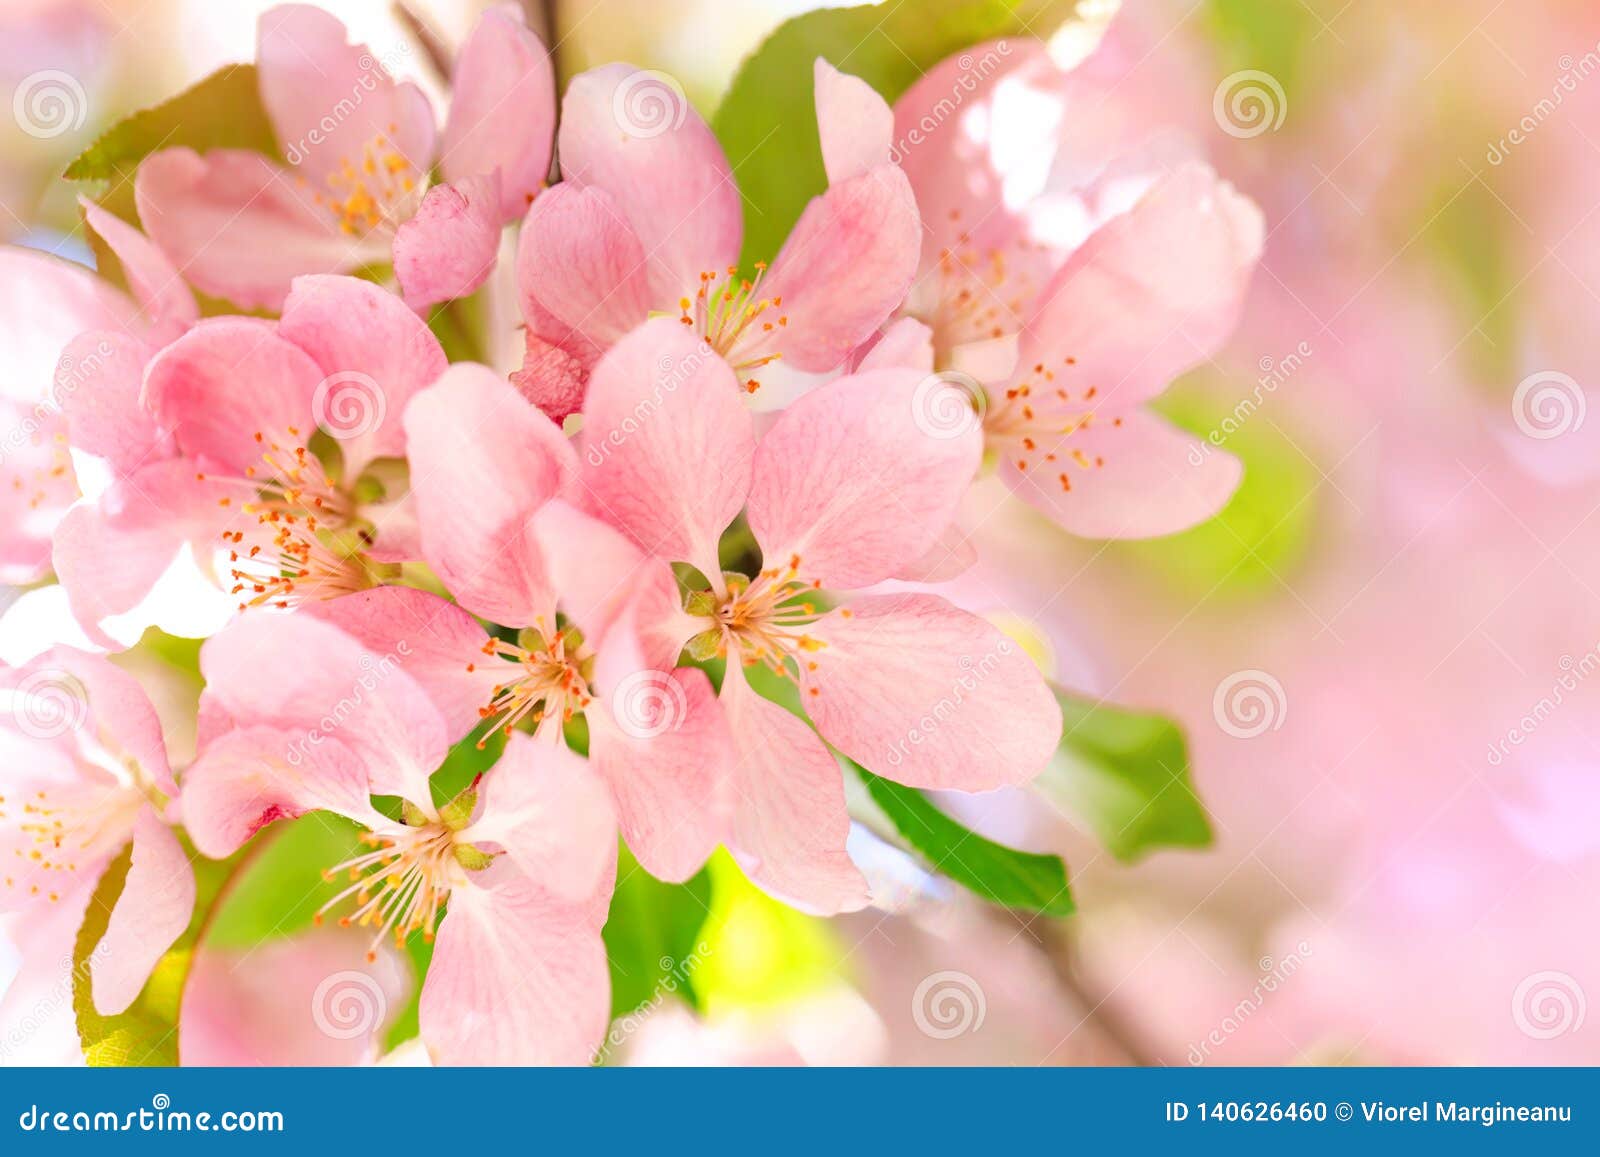 gorgeous stamens of blossom flowers with pink and red petals on background of blue sky. easter background with blossom blooming in